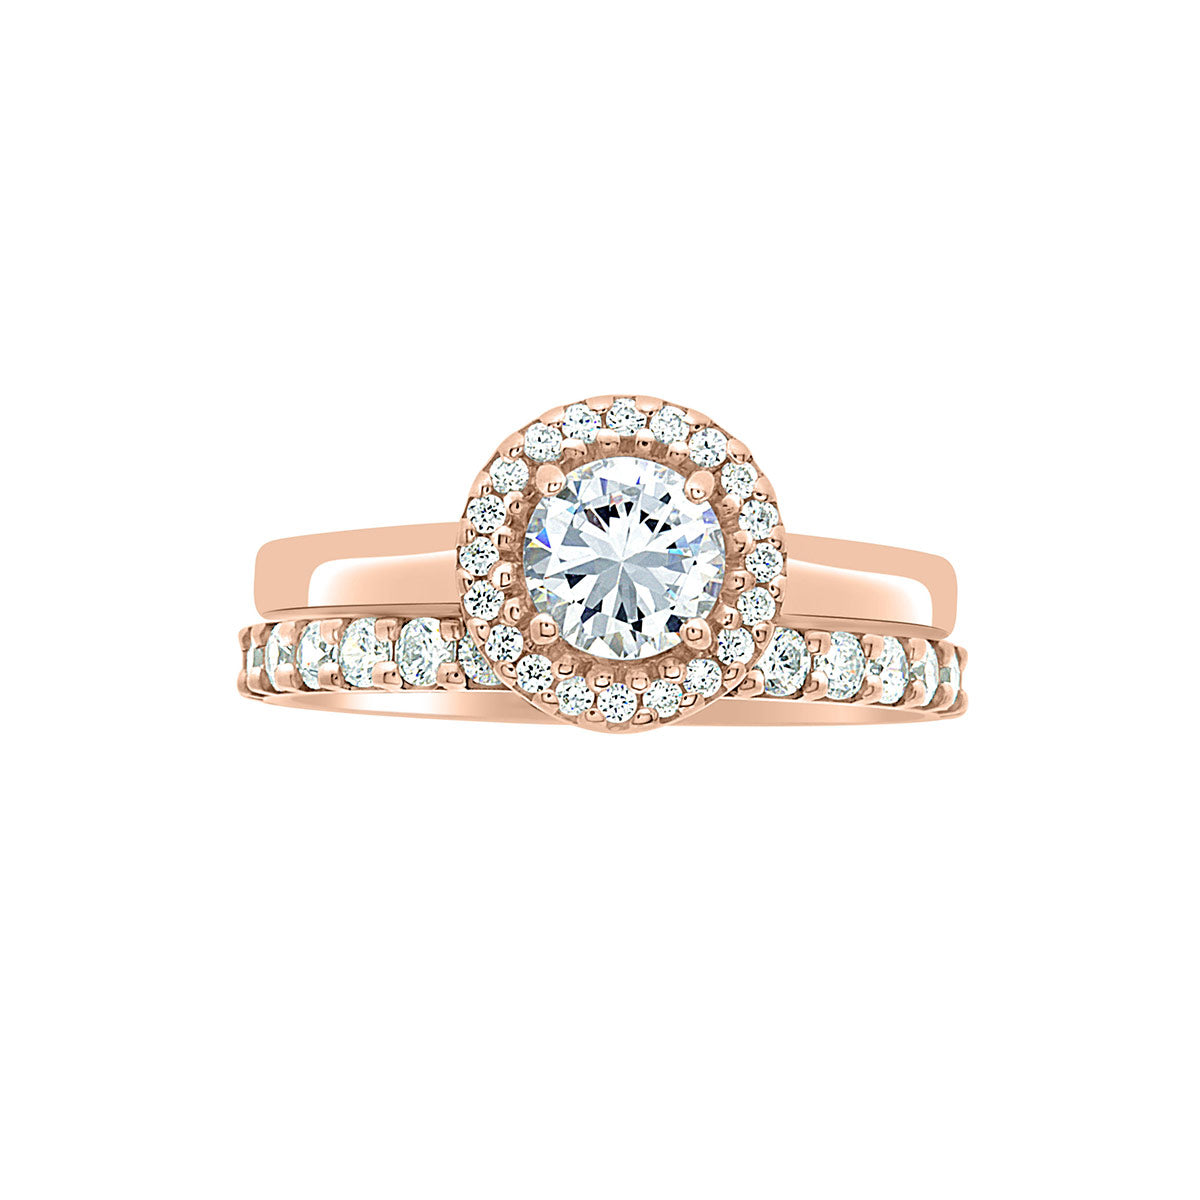 Round Vintage Engagement Ring in rose gold, a horizontal position against a white background. with a matching diamond wedding ring